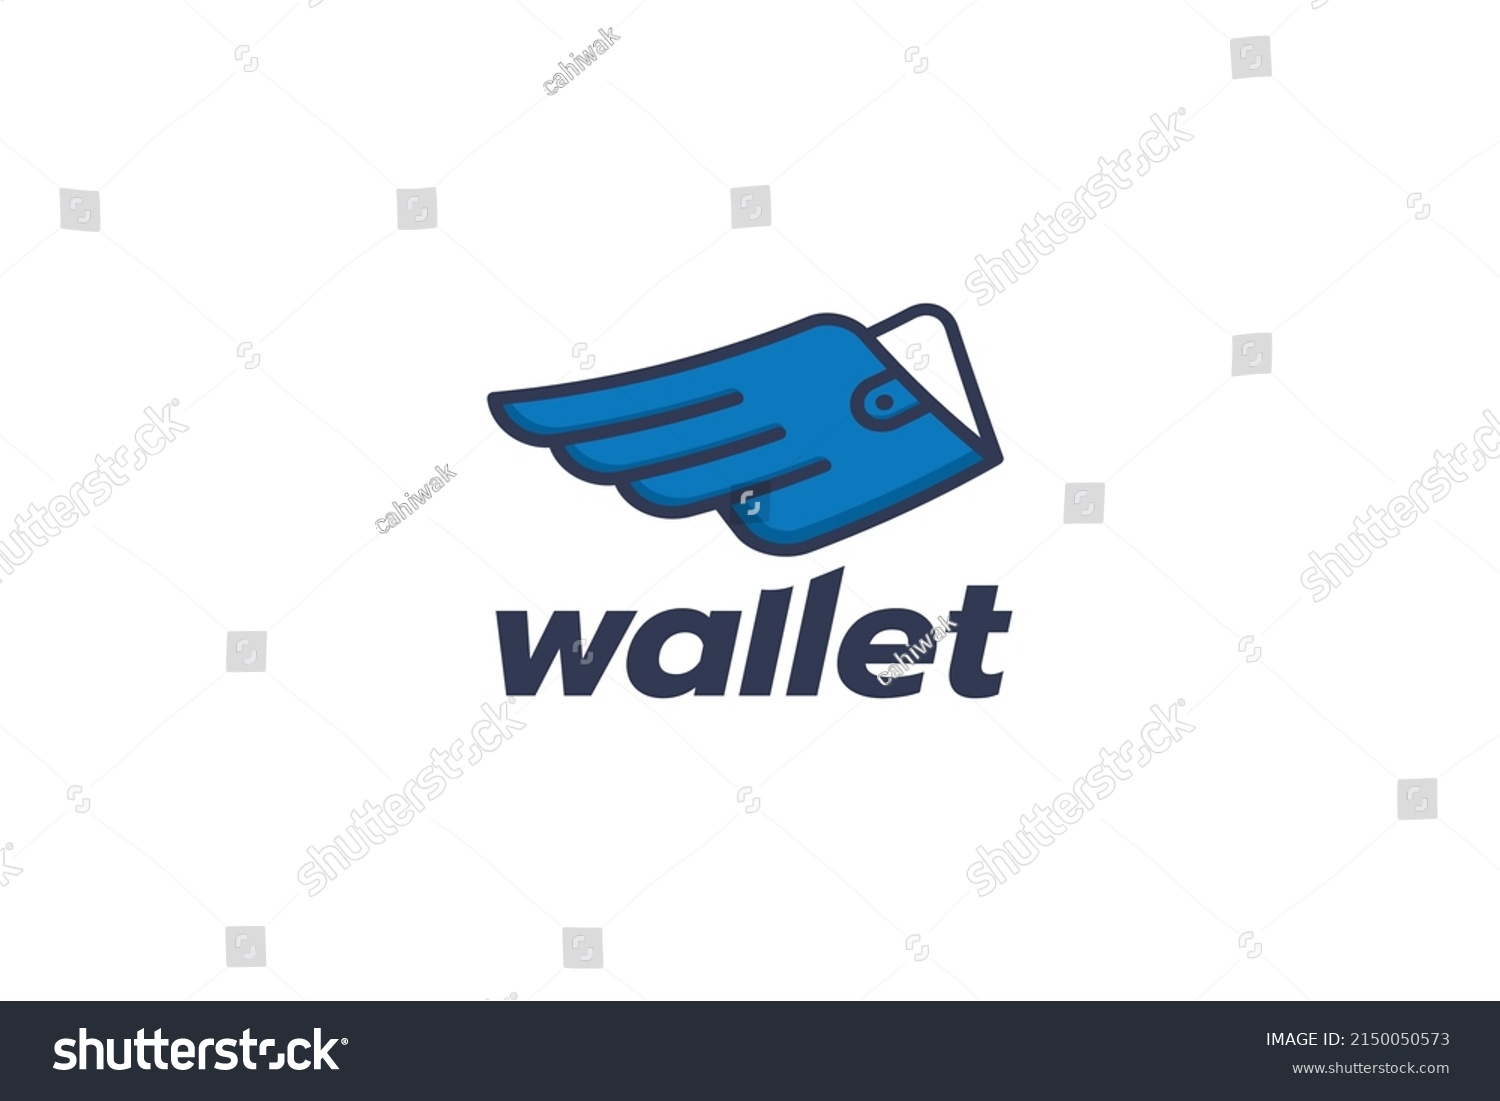 SVG of flying digital wallet logo with wings for any business svg